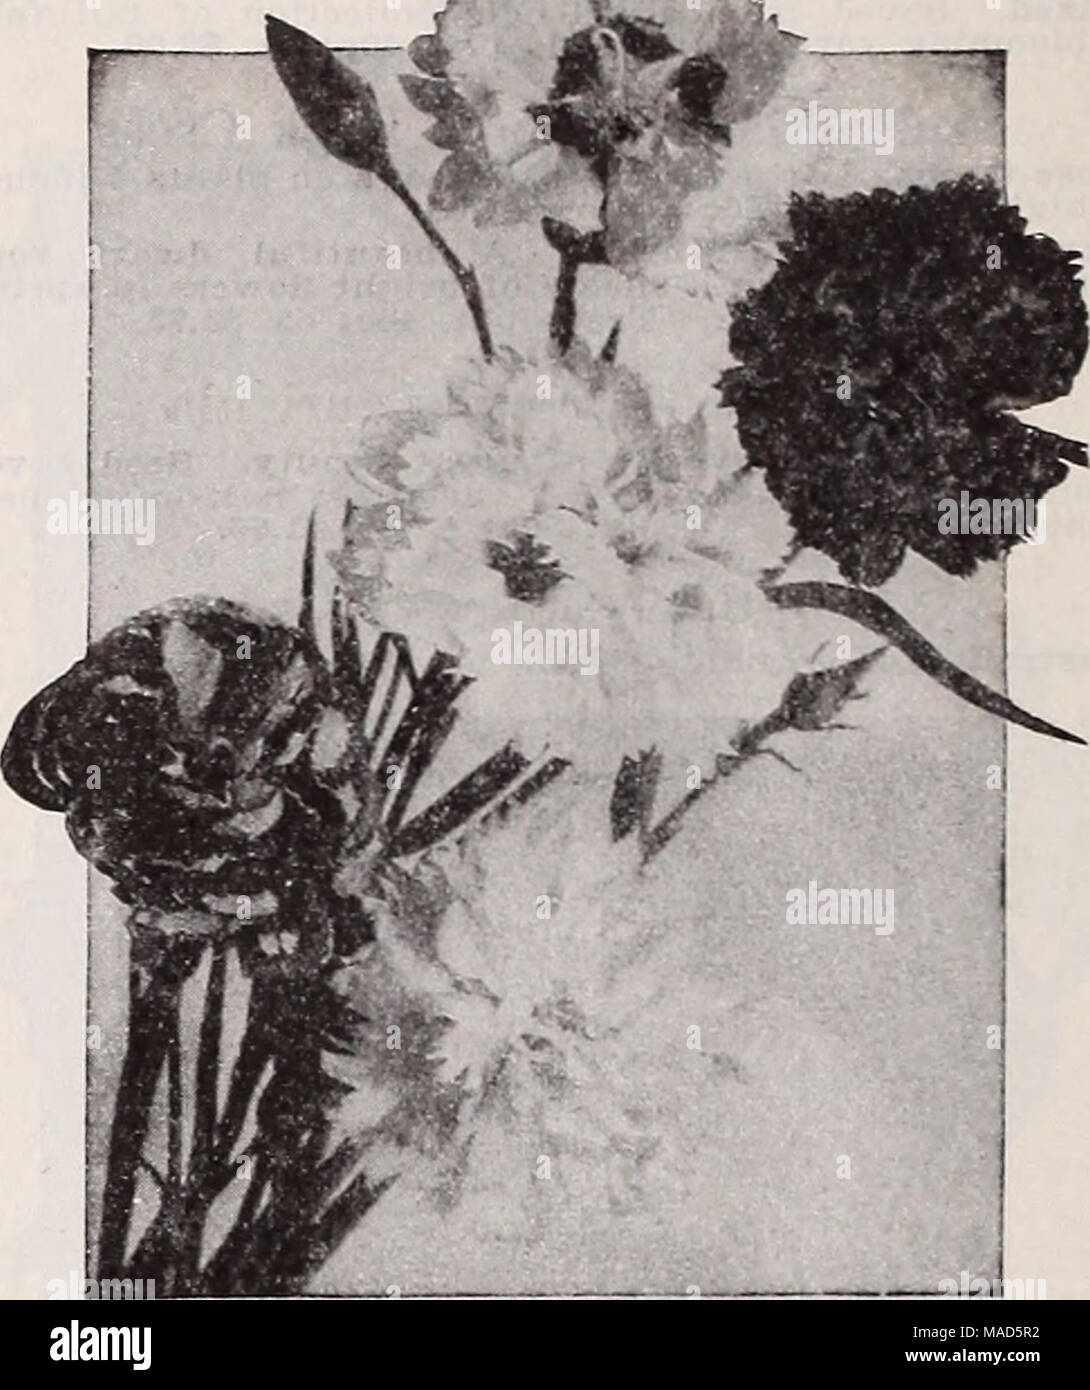 . Dreer's wholesale catalog for florists : winter spring summer 1937 . Dianthus plumarius. Double Mixed Dianthus—Hardy Pinks AUwoodi alpinus. Blooms first year from seed. Singlo and double fragrant flowers in all colors of Dianthus. 4 to 6 inches. Tr. pkt. 50c; oz. $3.00. Tr. ptct. Oz. Caesius (Cheddar Pink). A dwarf tufted variety. Rose-pink flowers $0 25 $1 00 Deltoides albns. Showy white flowers... 40 2 00 —Brilliant. Dwarf, brilliant carmine blooms 30 1 50 G-raniticuB. Very low-growing, forming a dense carpet covered in May and June with crimson flowers; 4 inches. A splendid variety for th Stock Photo